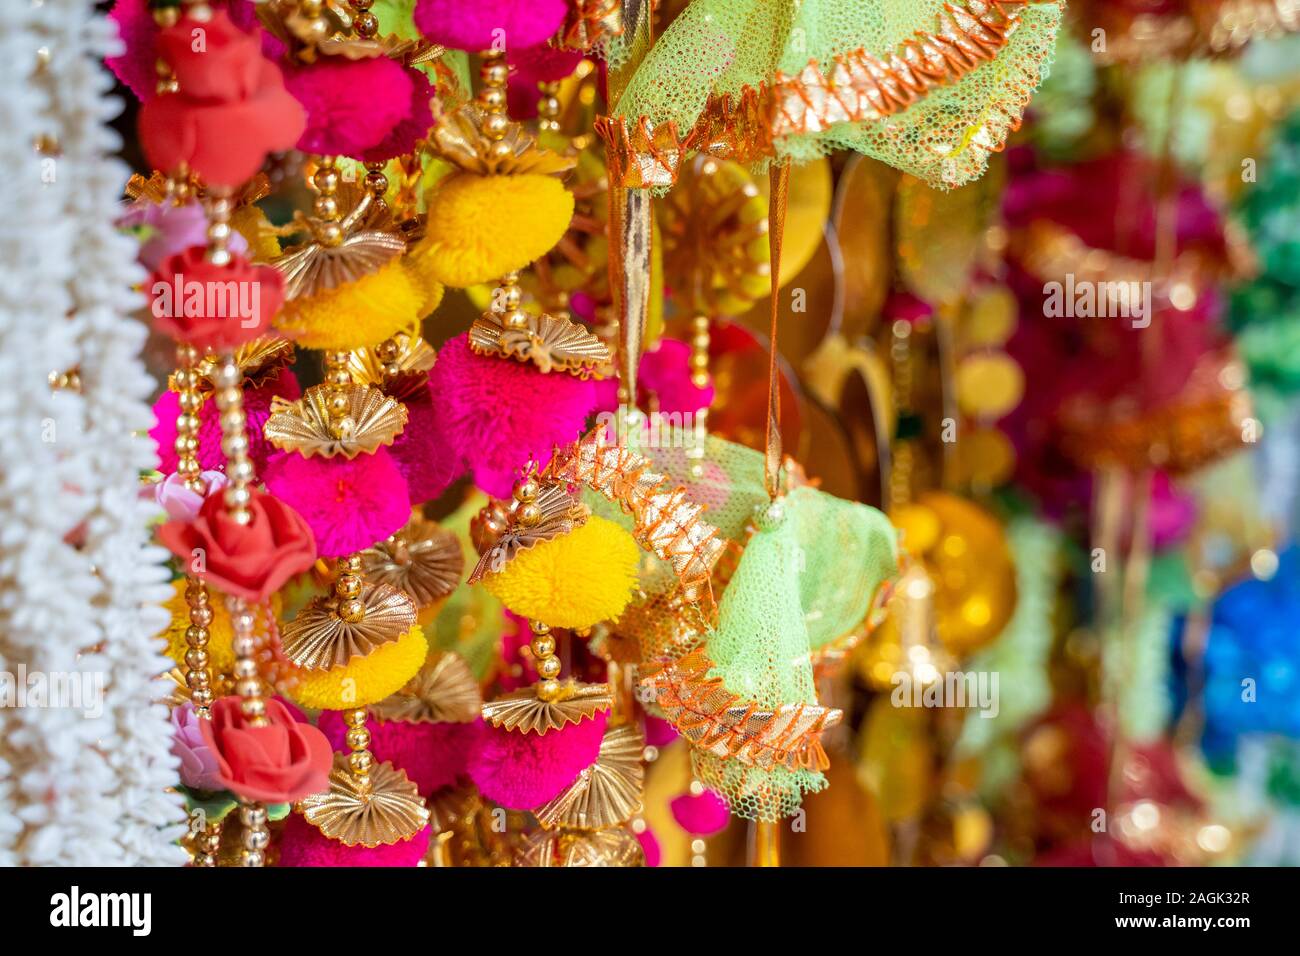 Colorful fabric decorations on display for sale in Chandi Chowk Old Delhi. These flowers, beads and bells designs are popular in weddings, festivals a Stock Photo